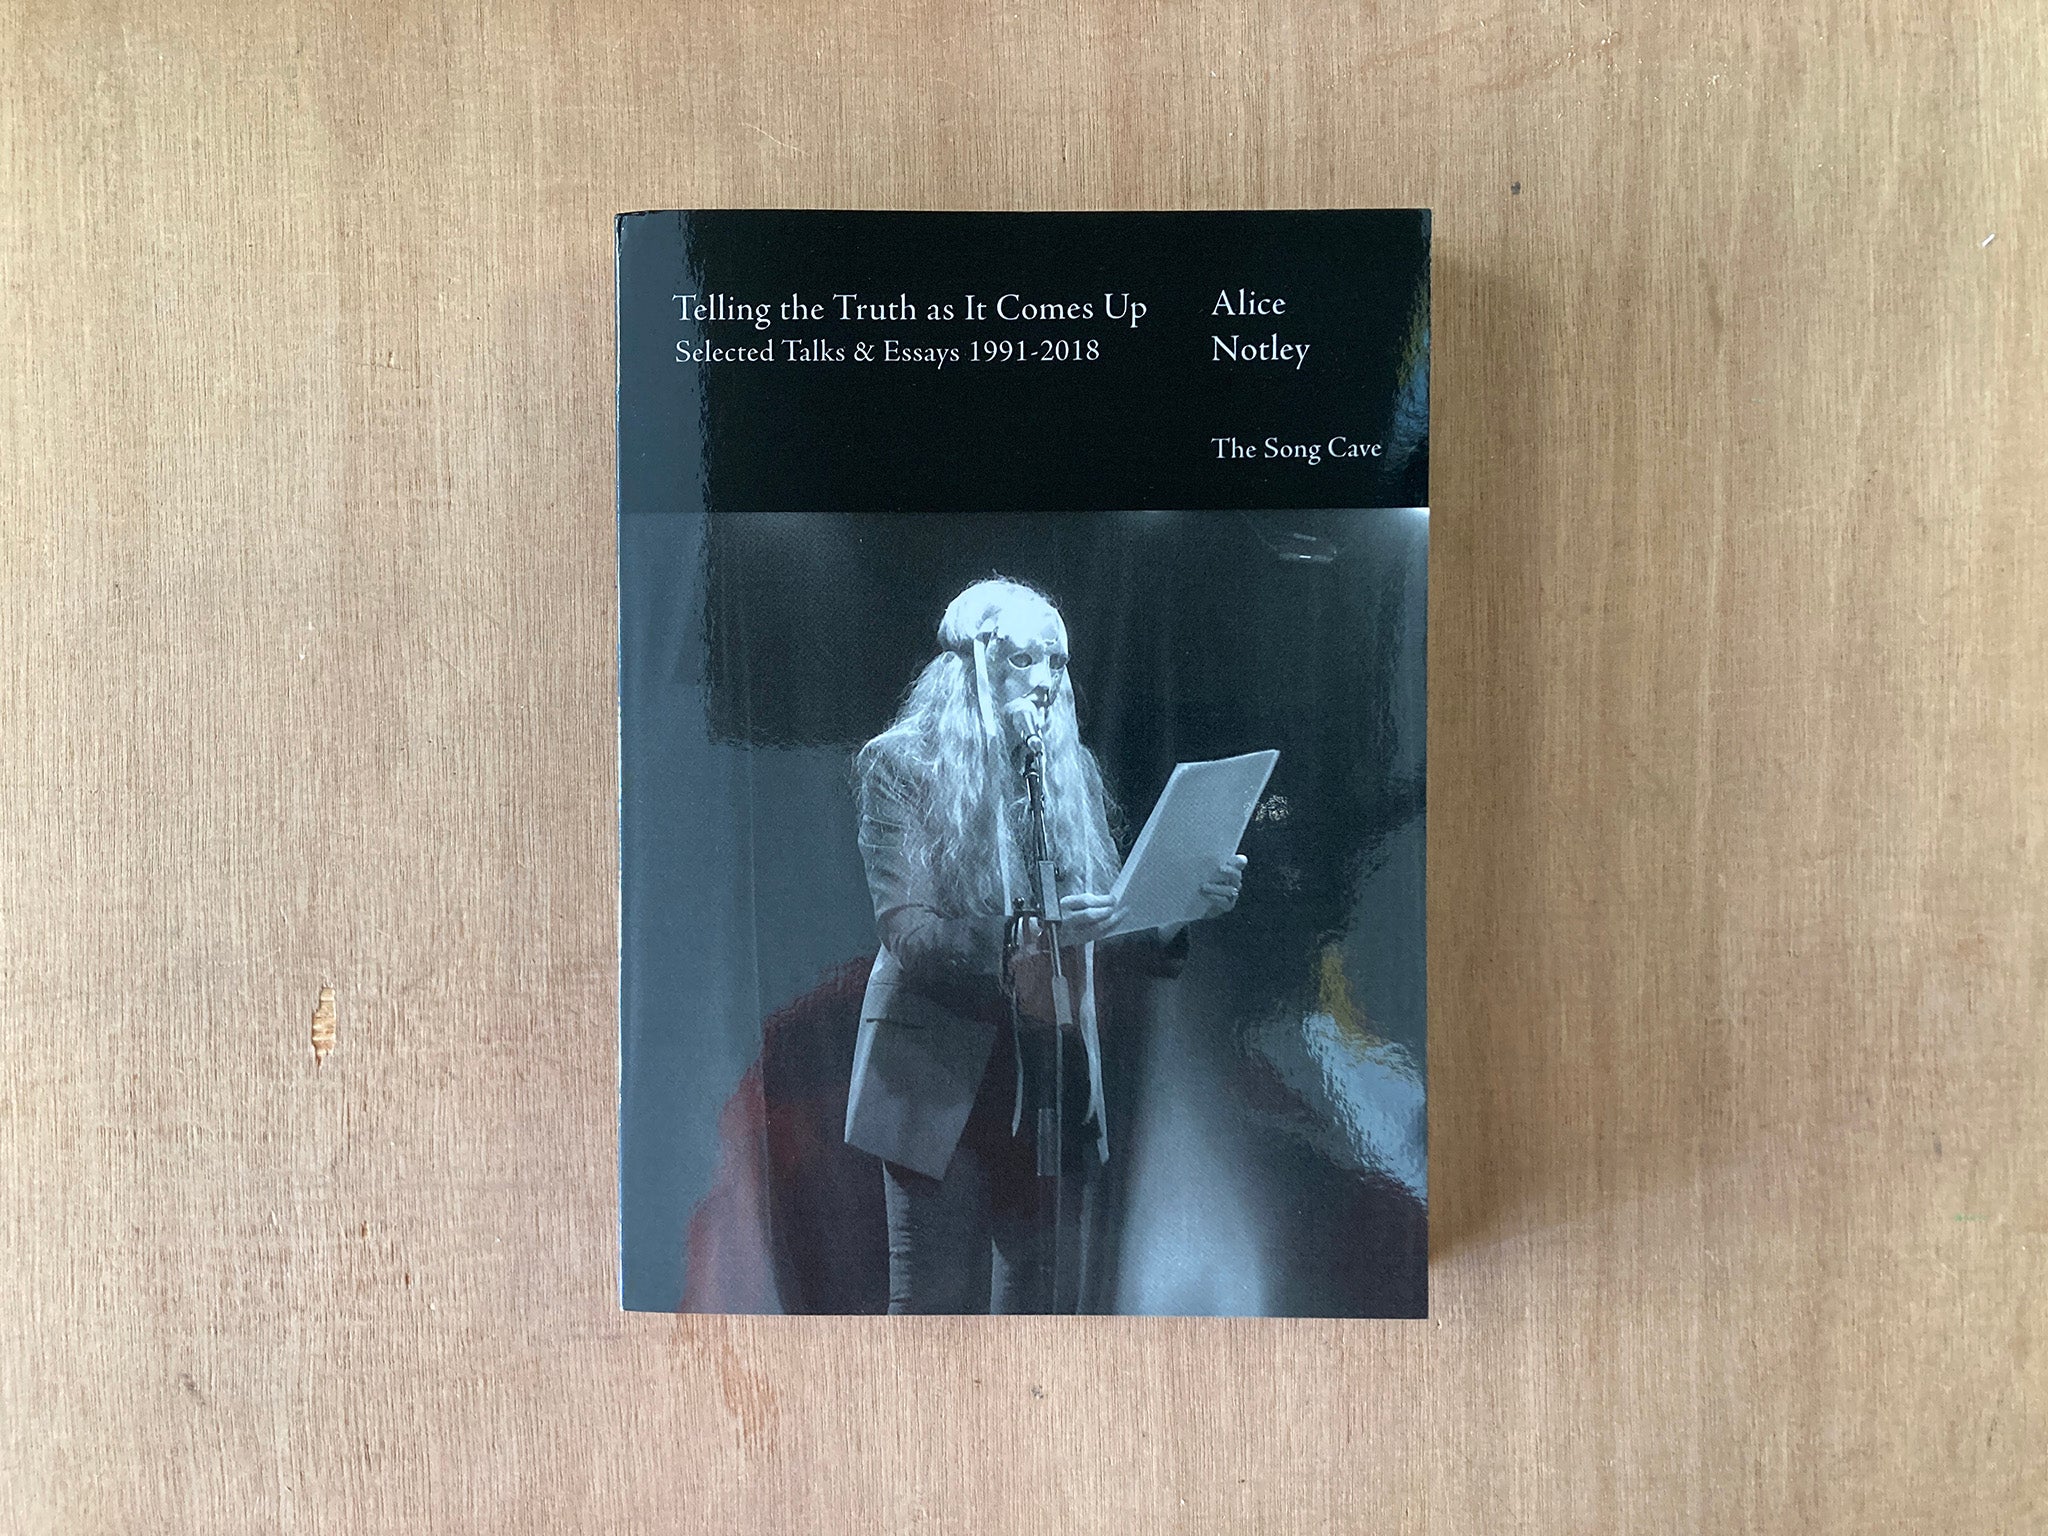 TELLING THE TRUTH AS IT COMES UP, SELECTED TALKS & ESSAYS 1991-2018 by Alice Notley